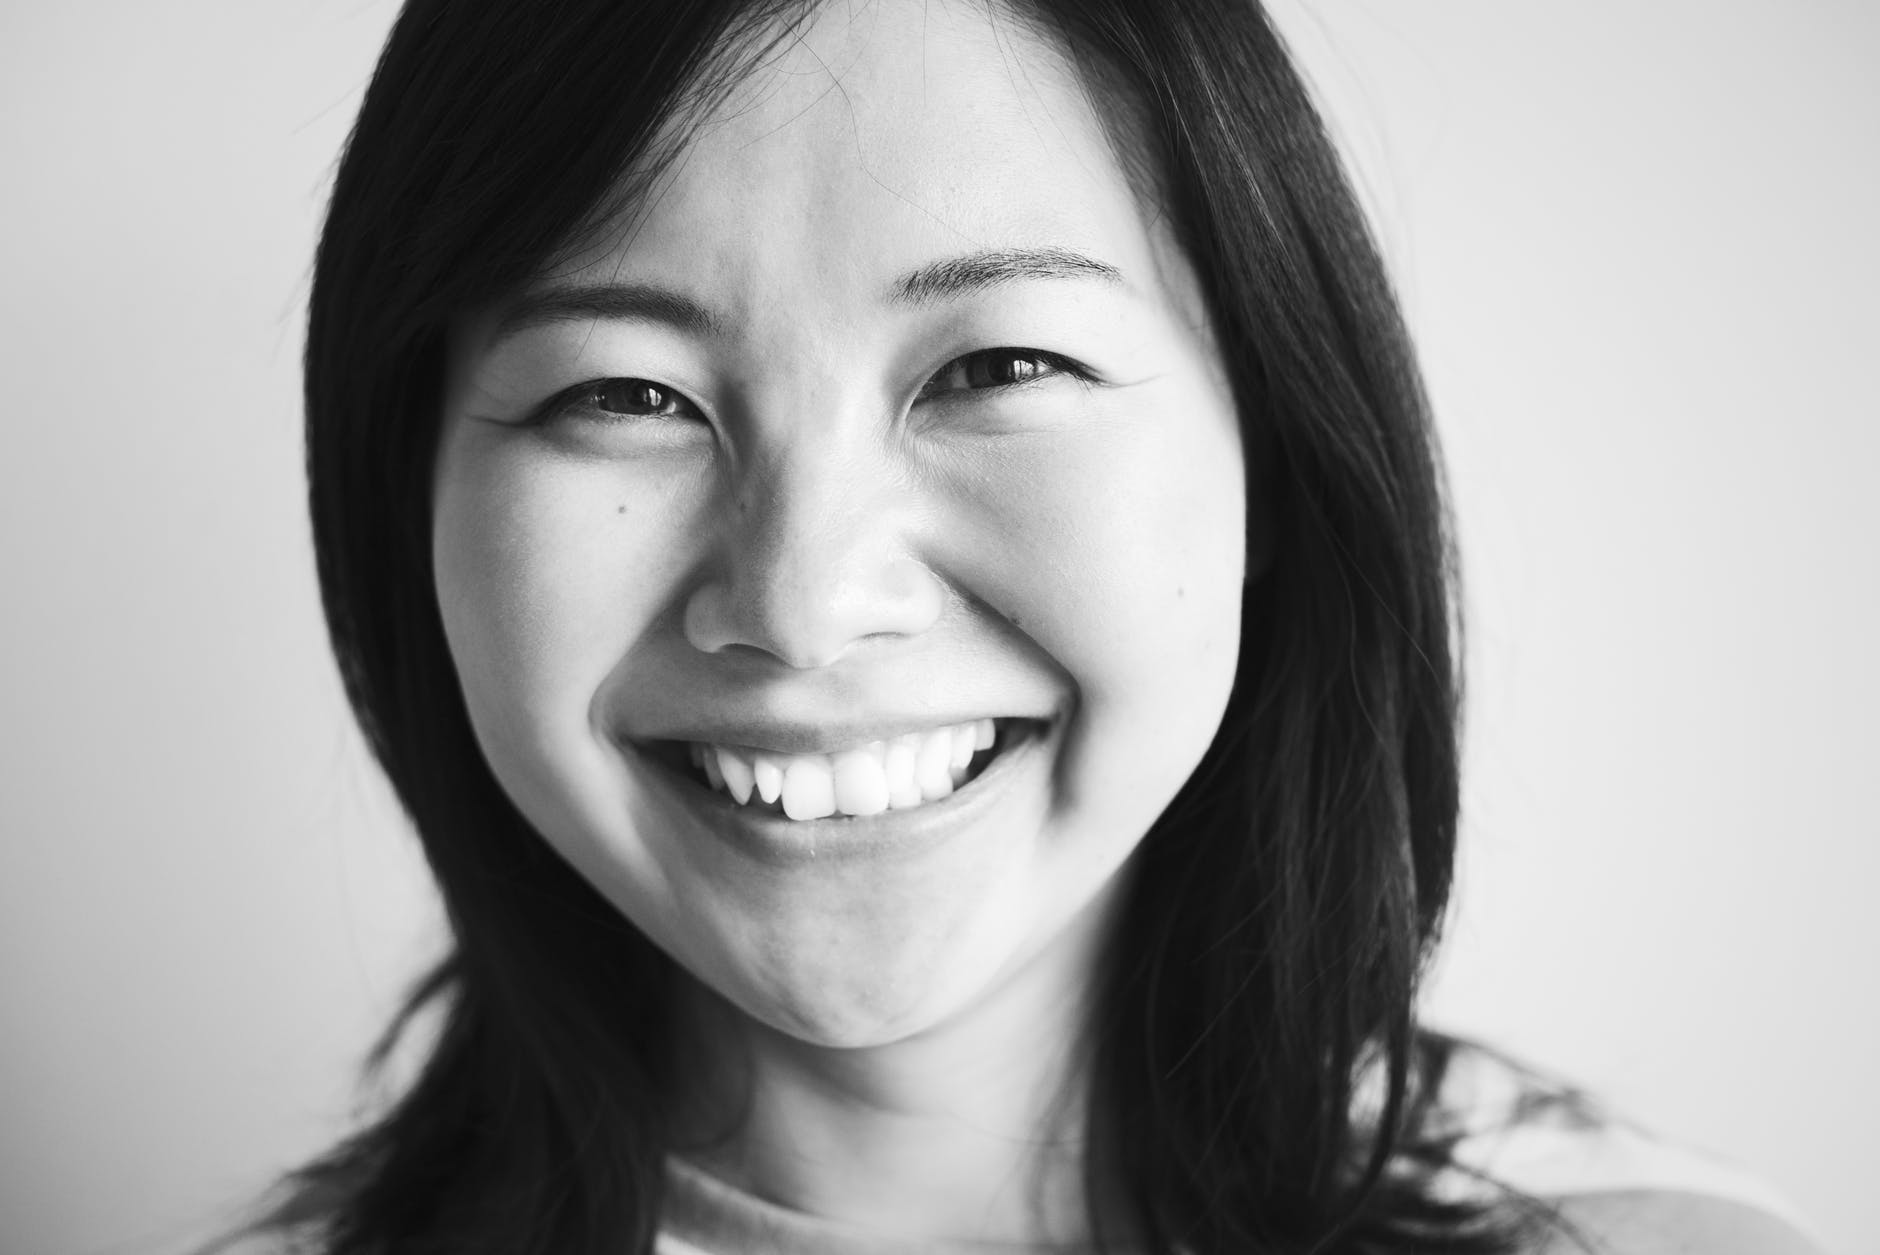 grayscale portrait photo of a woman smiling